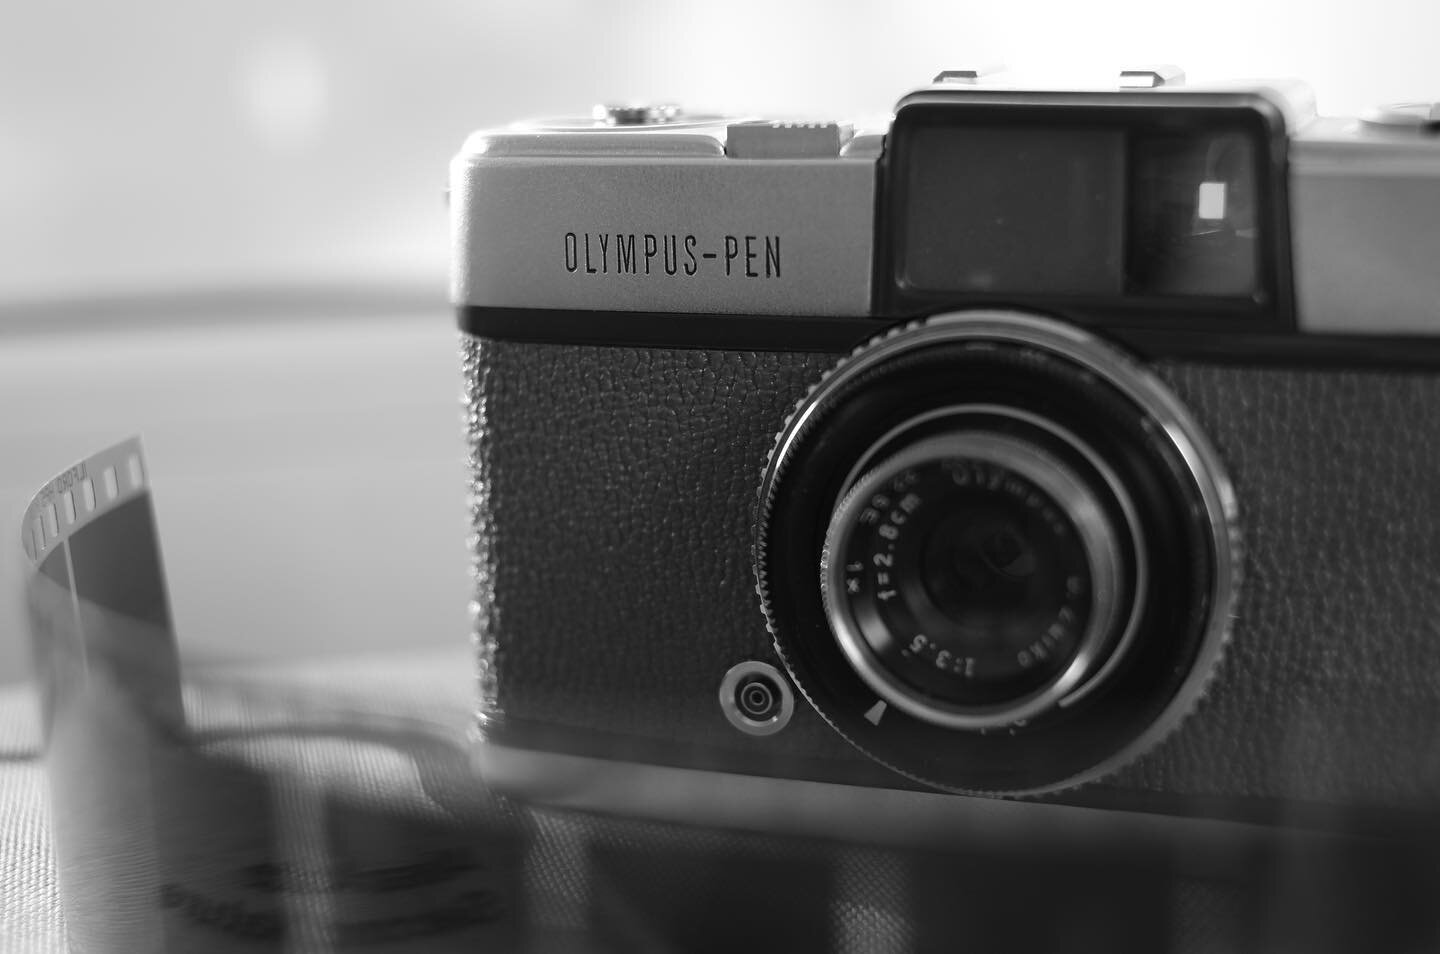 The original Olympus Pen. A camera design masterpiece by Yoshihisa Maitani. The Pen was built between 1959-1964, features an excellent lens and shoots the half-frame format. Find the in-depth review on the channel.